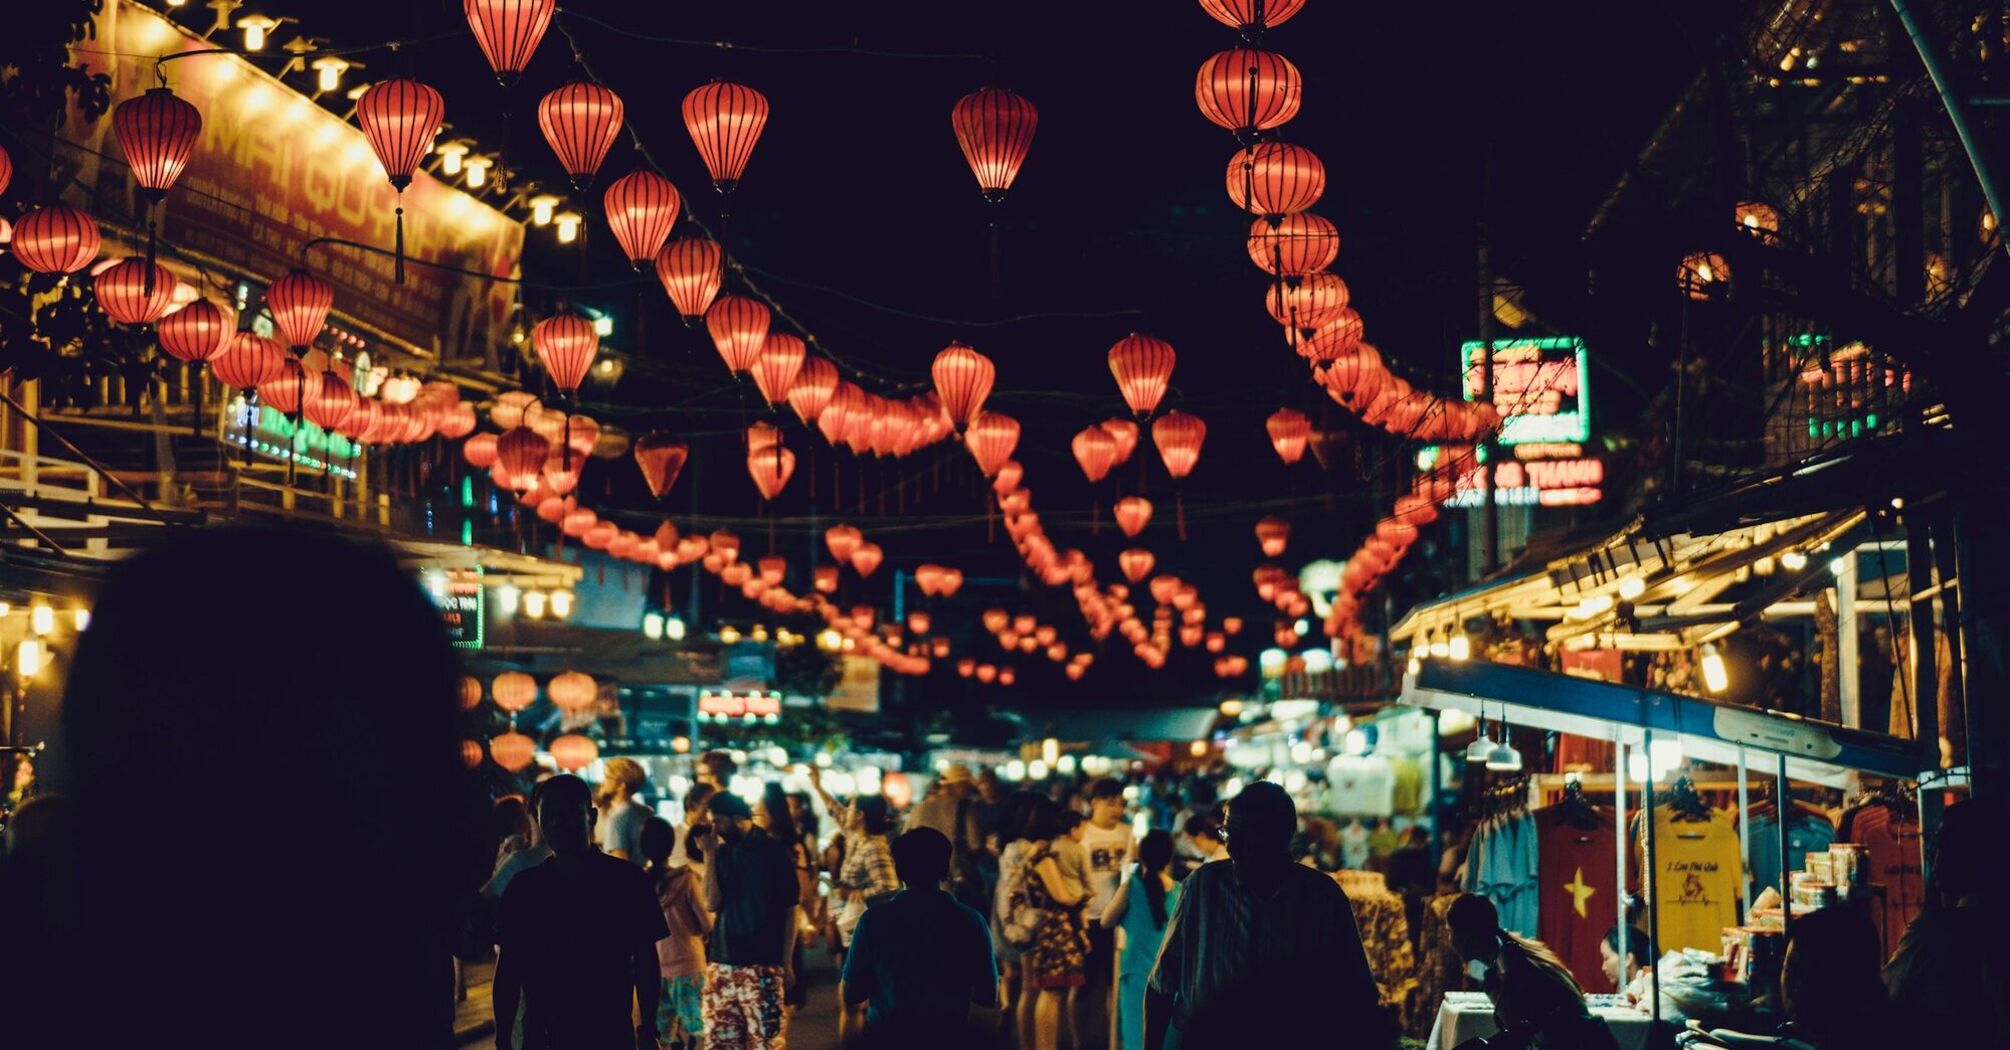 Busy Vietnamese night market adorned with red lanterns